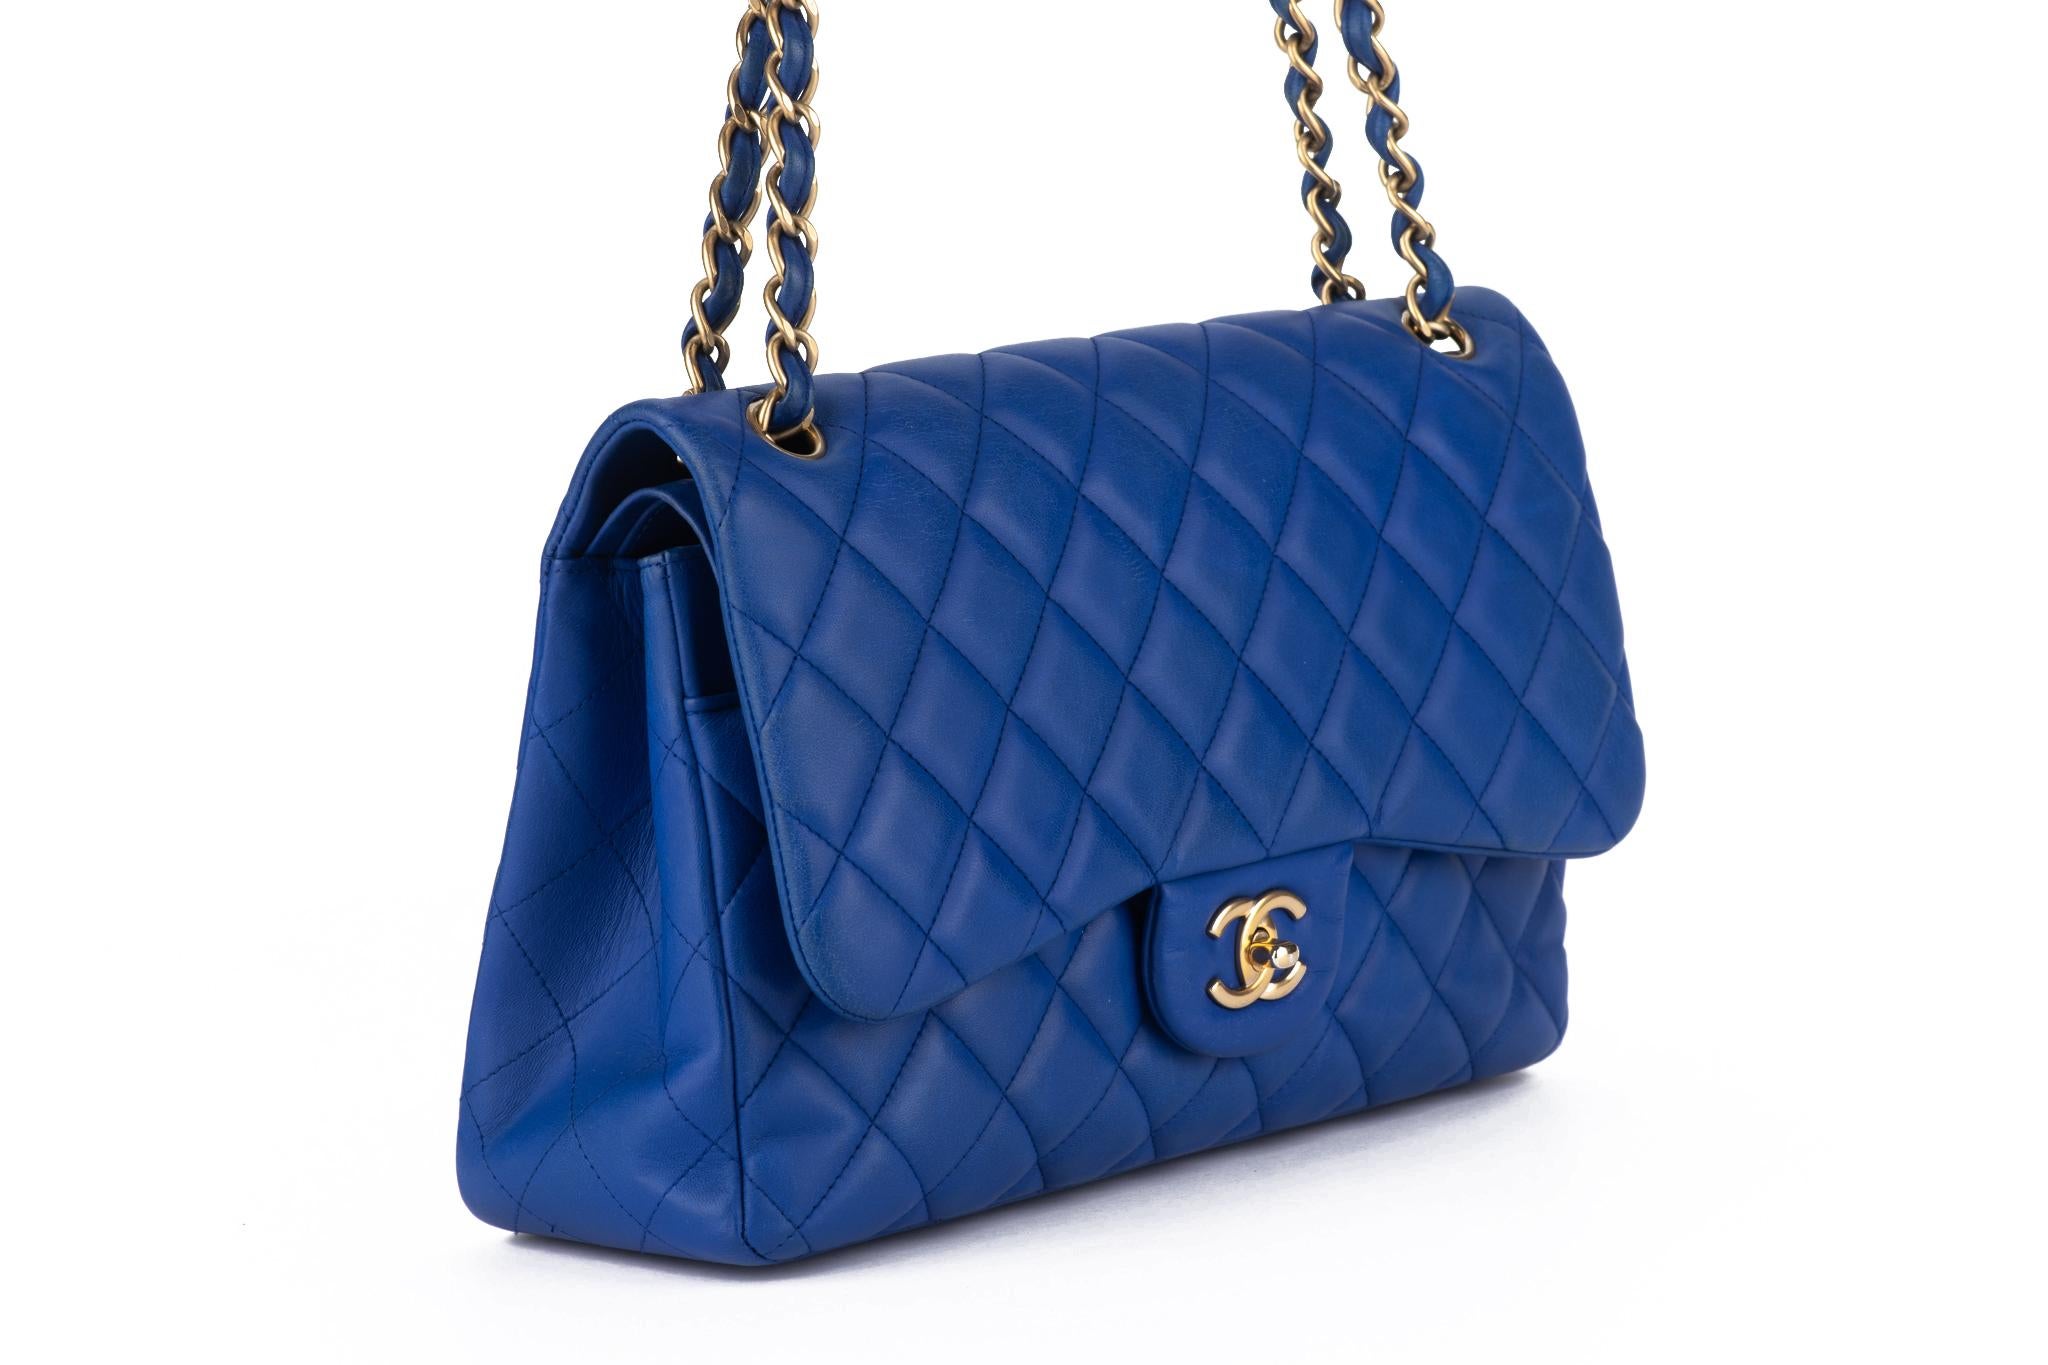 Chanel Jumbo Blue Quilted Double Flap In Excellent Condition For Sale In West Hollywood, CA